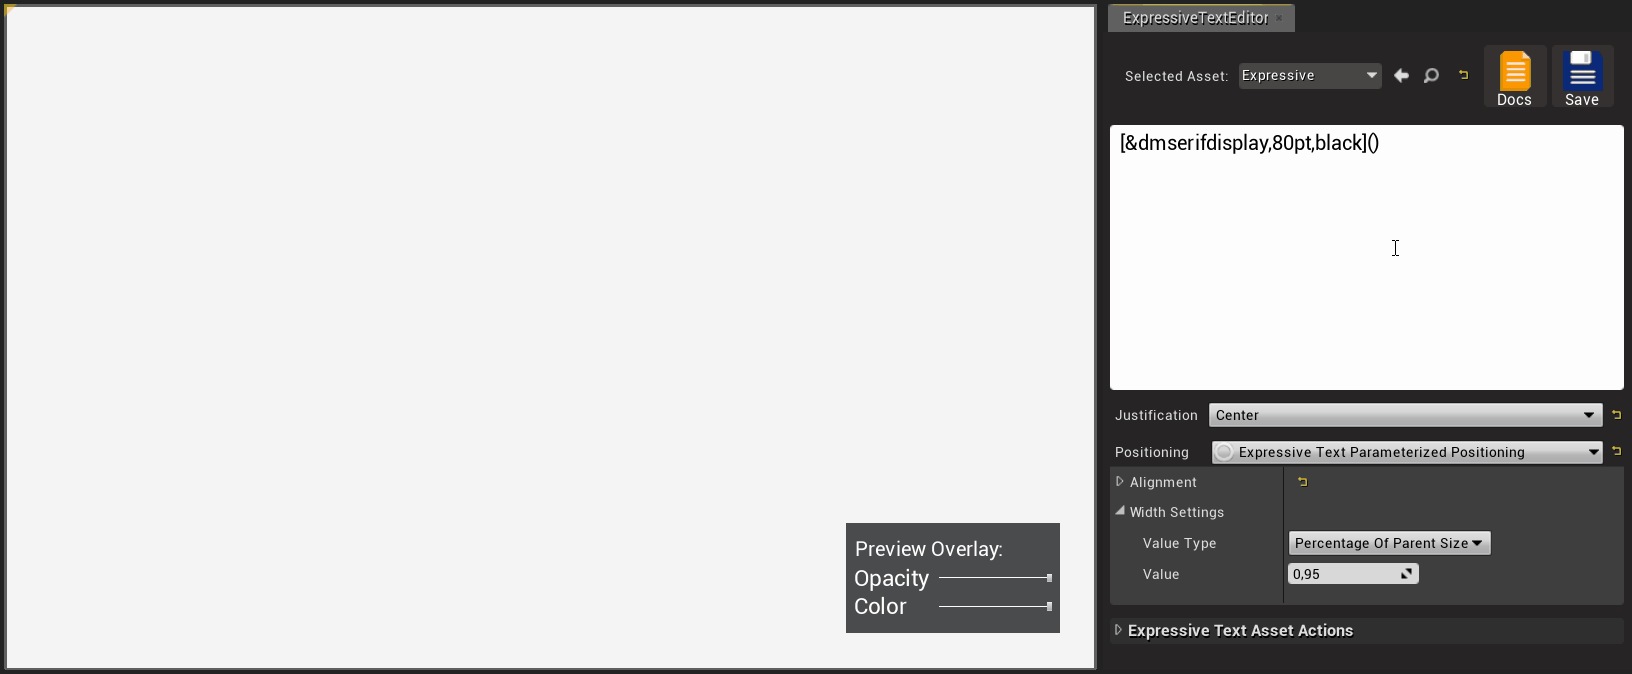                                                                                                                                                                                      Expressive Text Editor with realtime preview